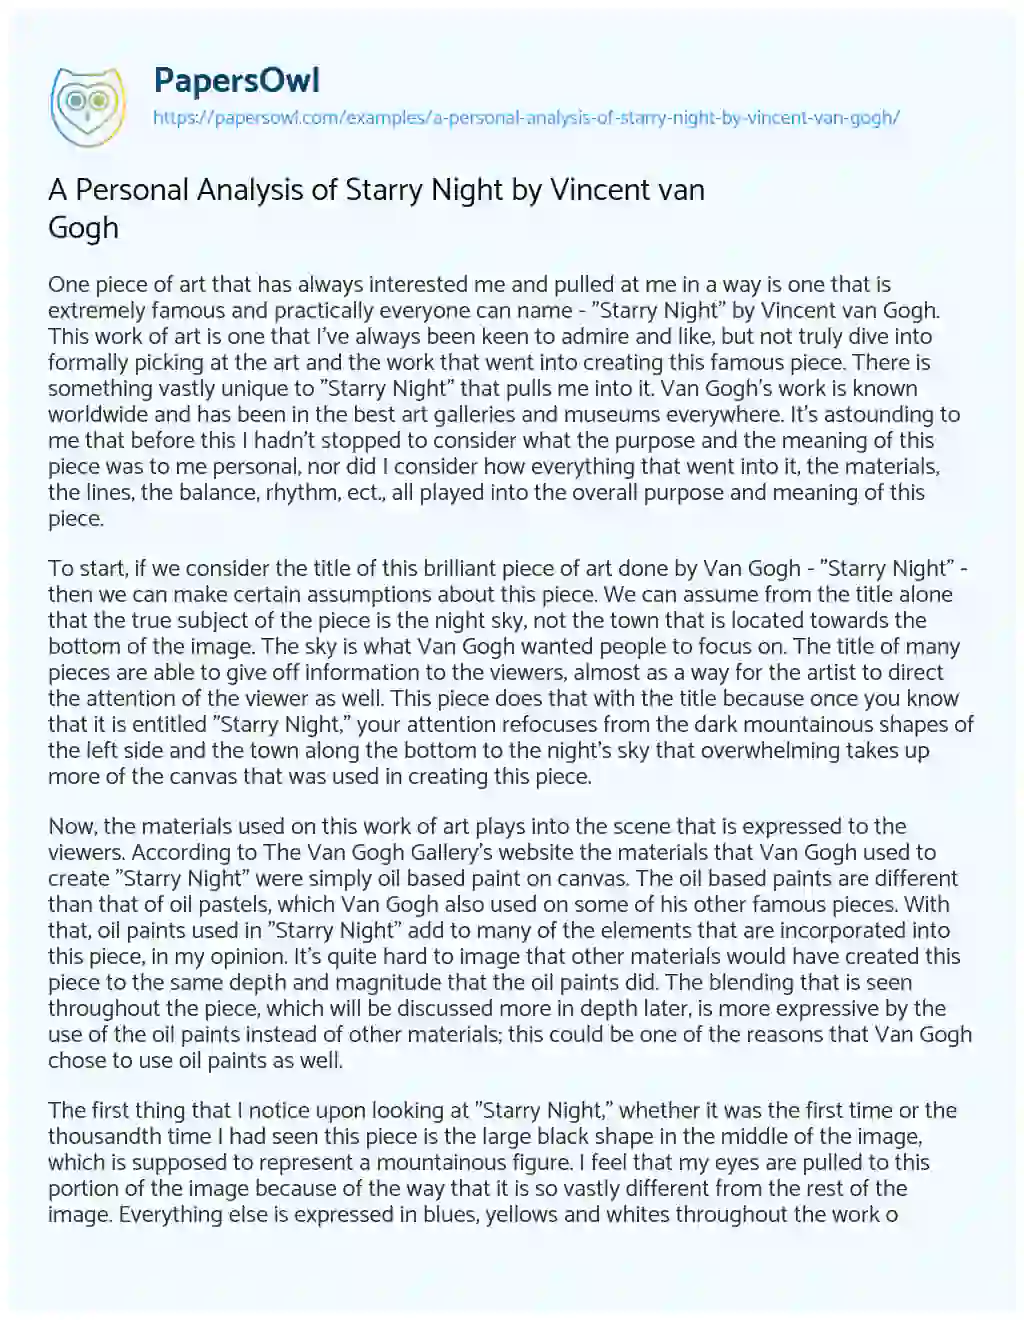 Essay on A Personal Analysis of Starry Night by Vincent Van Gogh